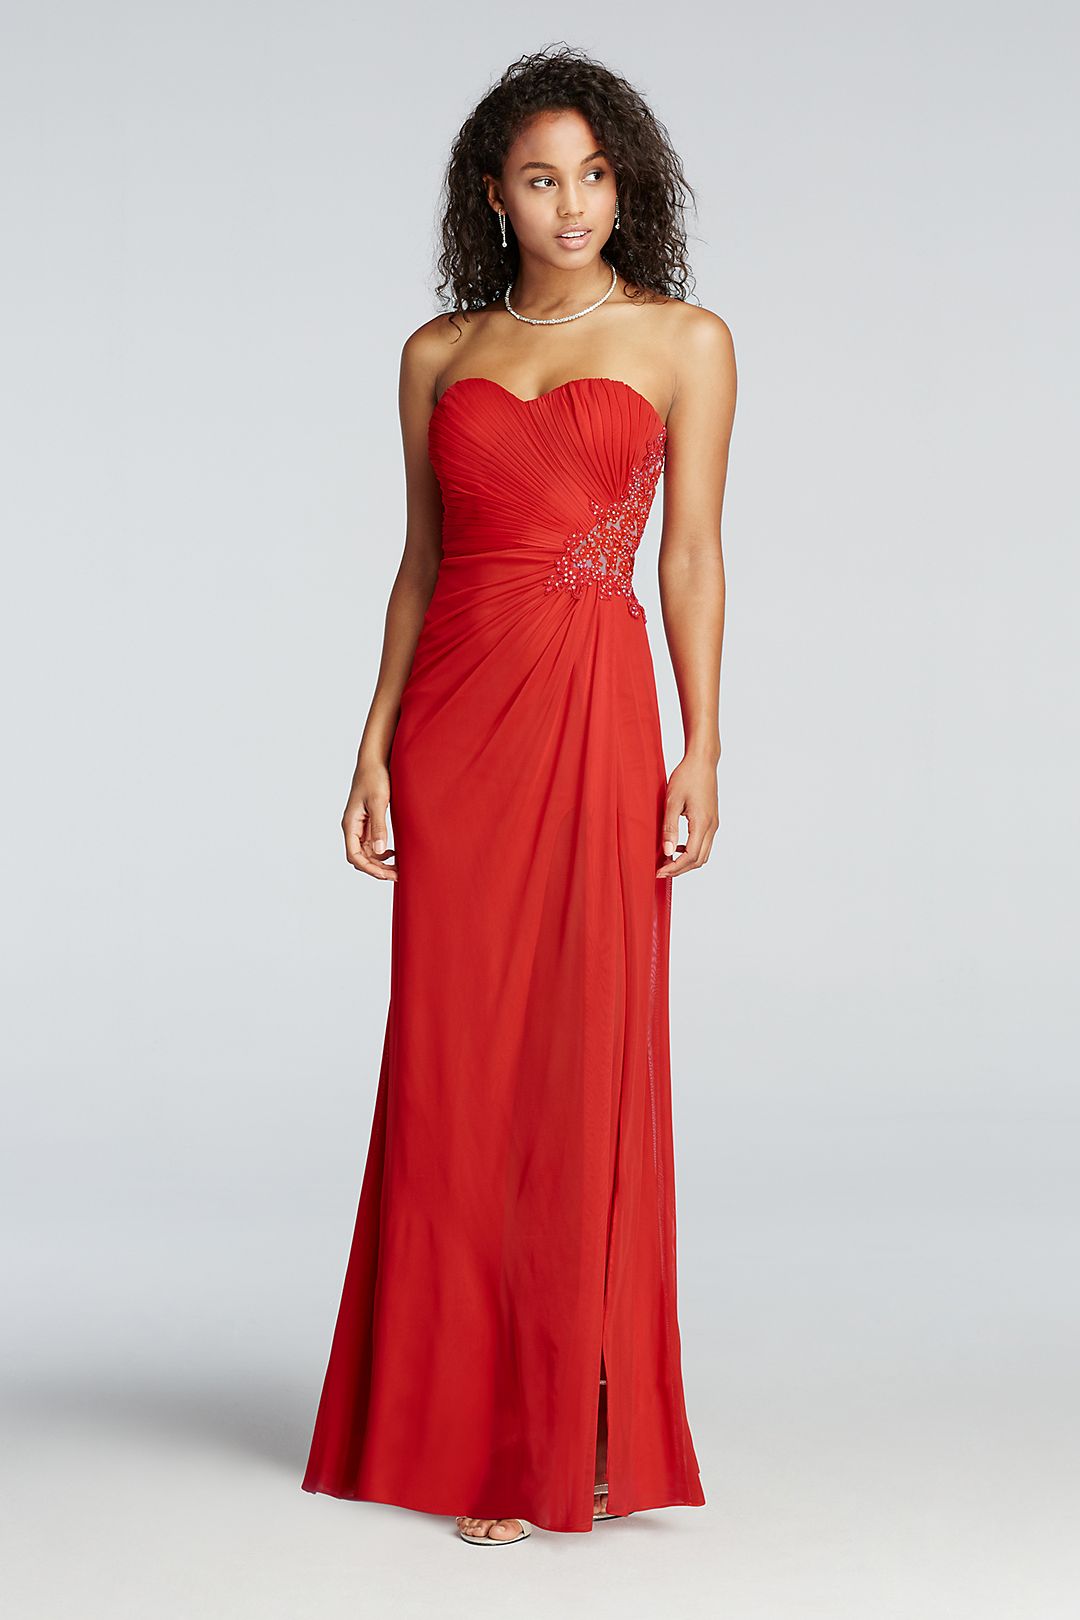 Strapless Beaded Cut Out Back Prom Dress Image 4